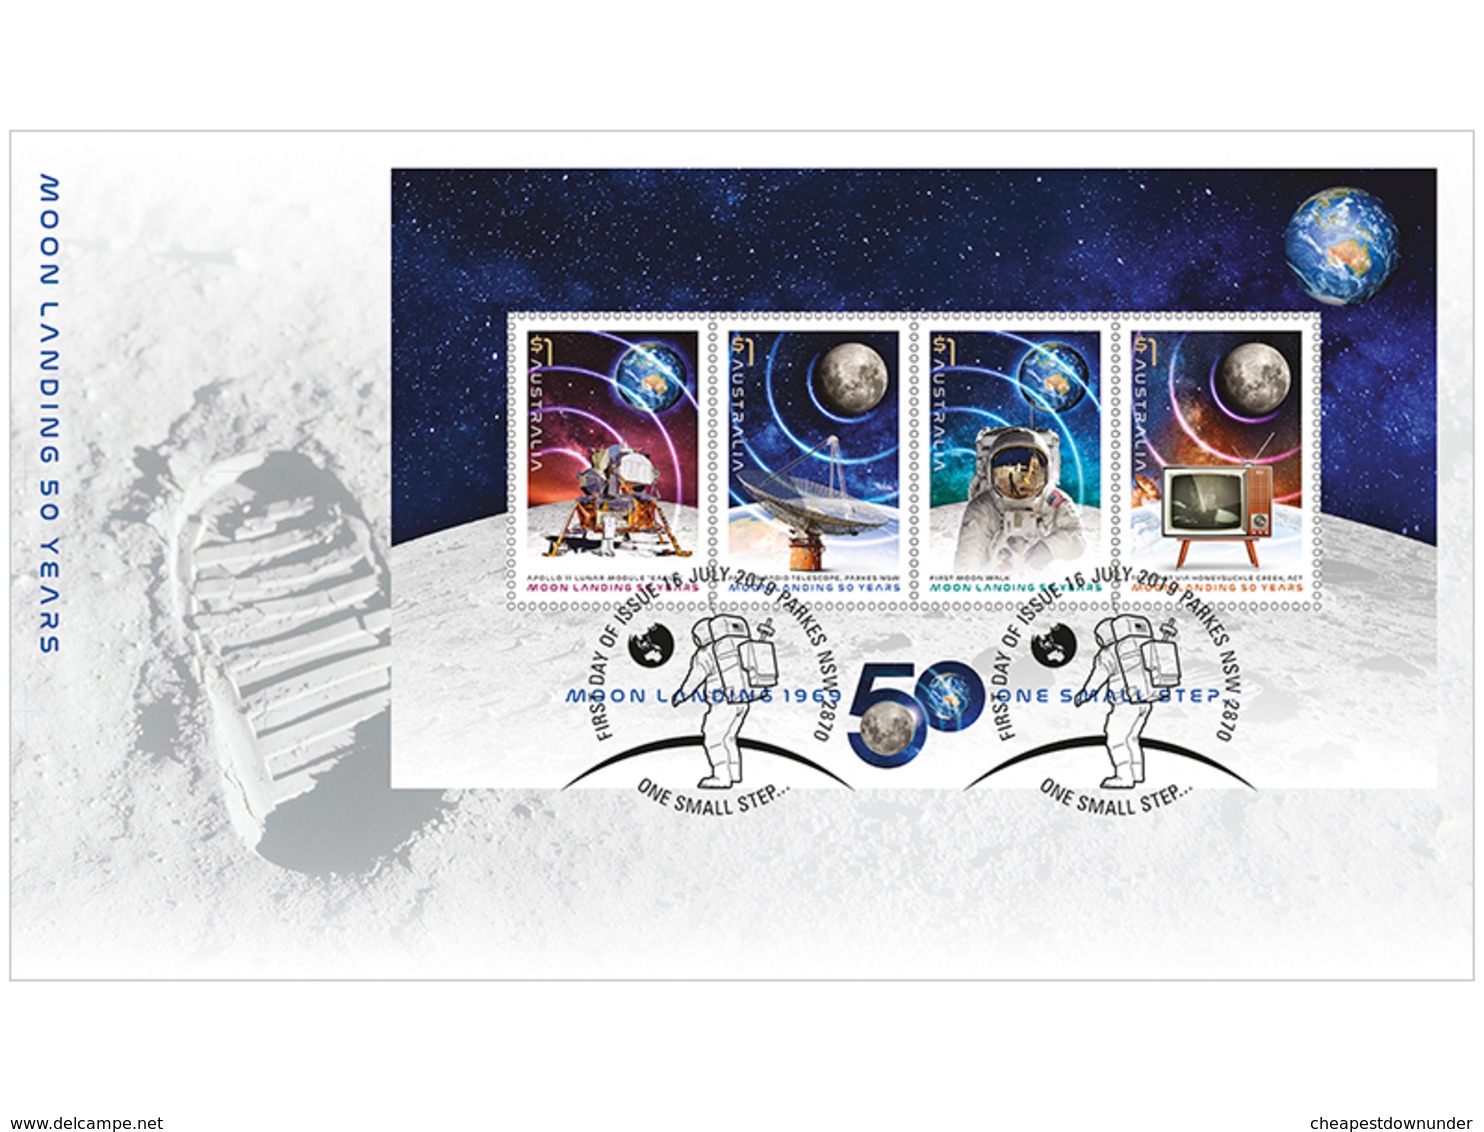 Australia 2019 Minisheet First Day Cover FDC - Moon Landing 50 Years - FDC